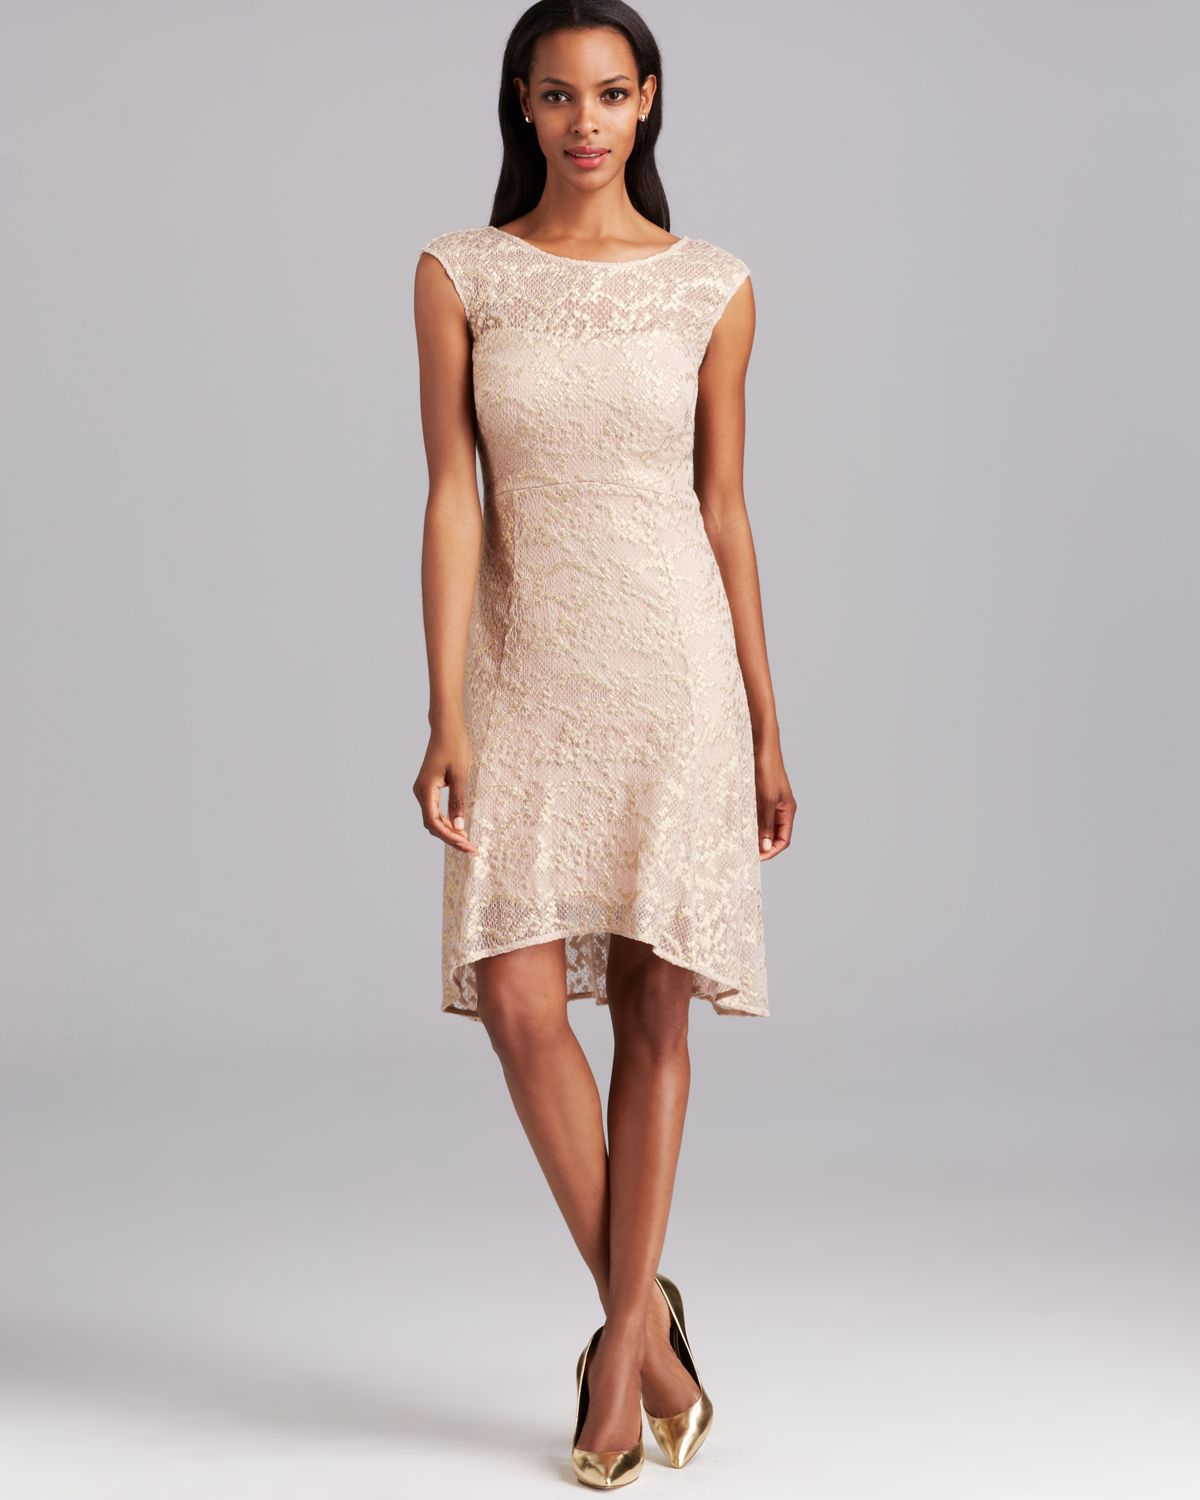 Lyst - Kay Unger Dress Cap Sleeve Metallic Knit Lace Highlow in Pink